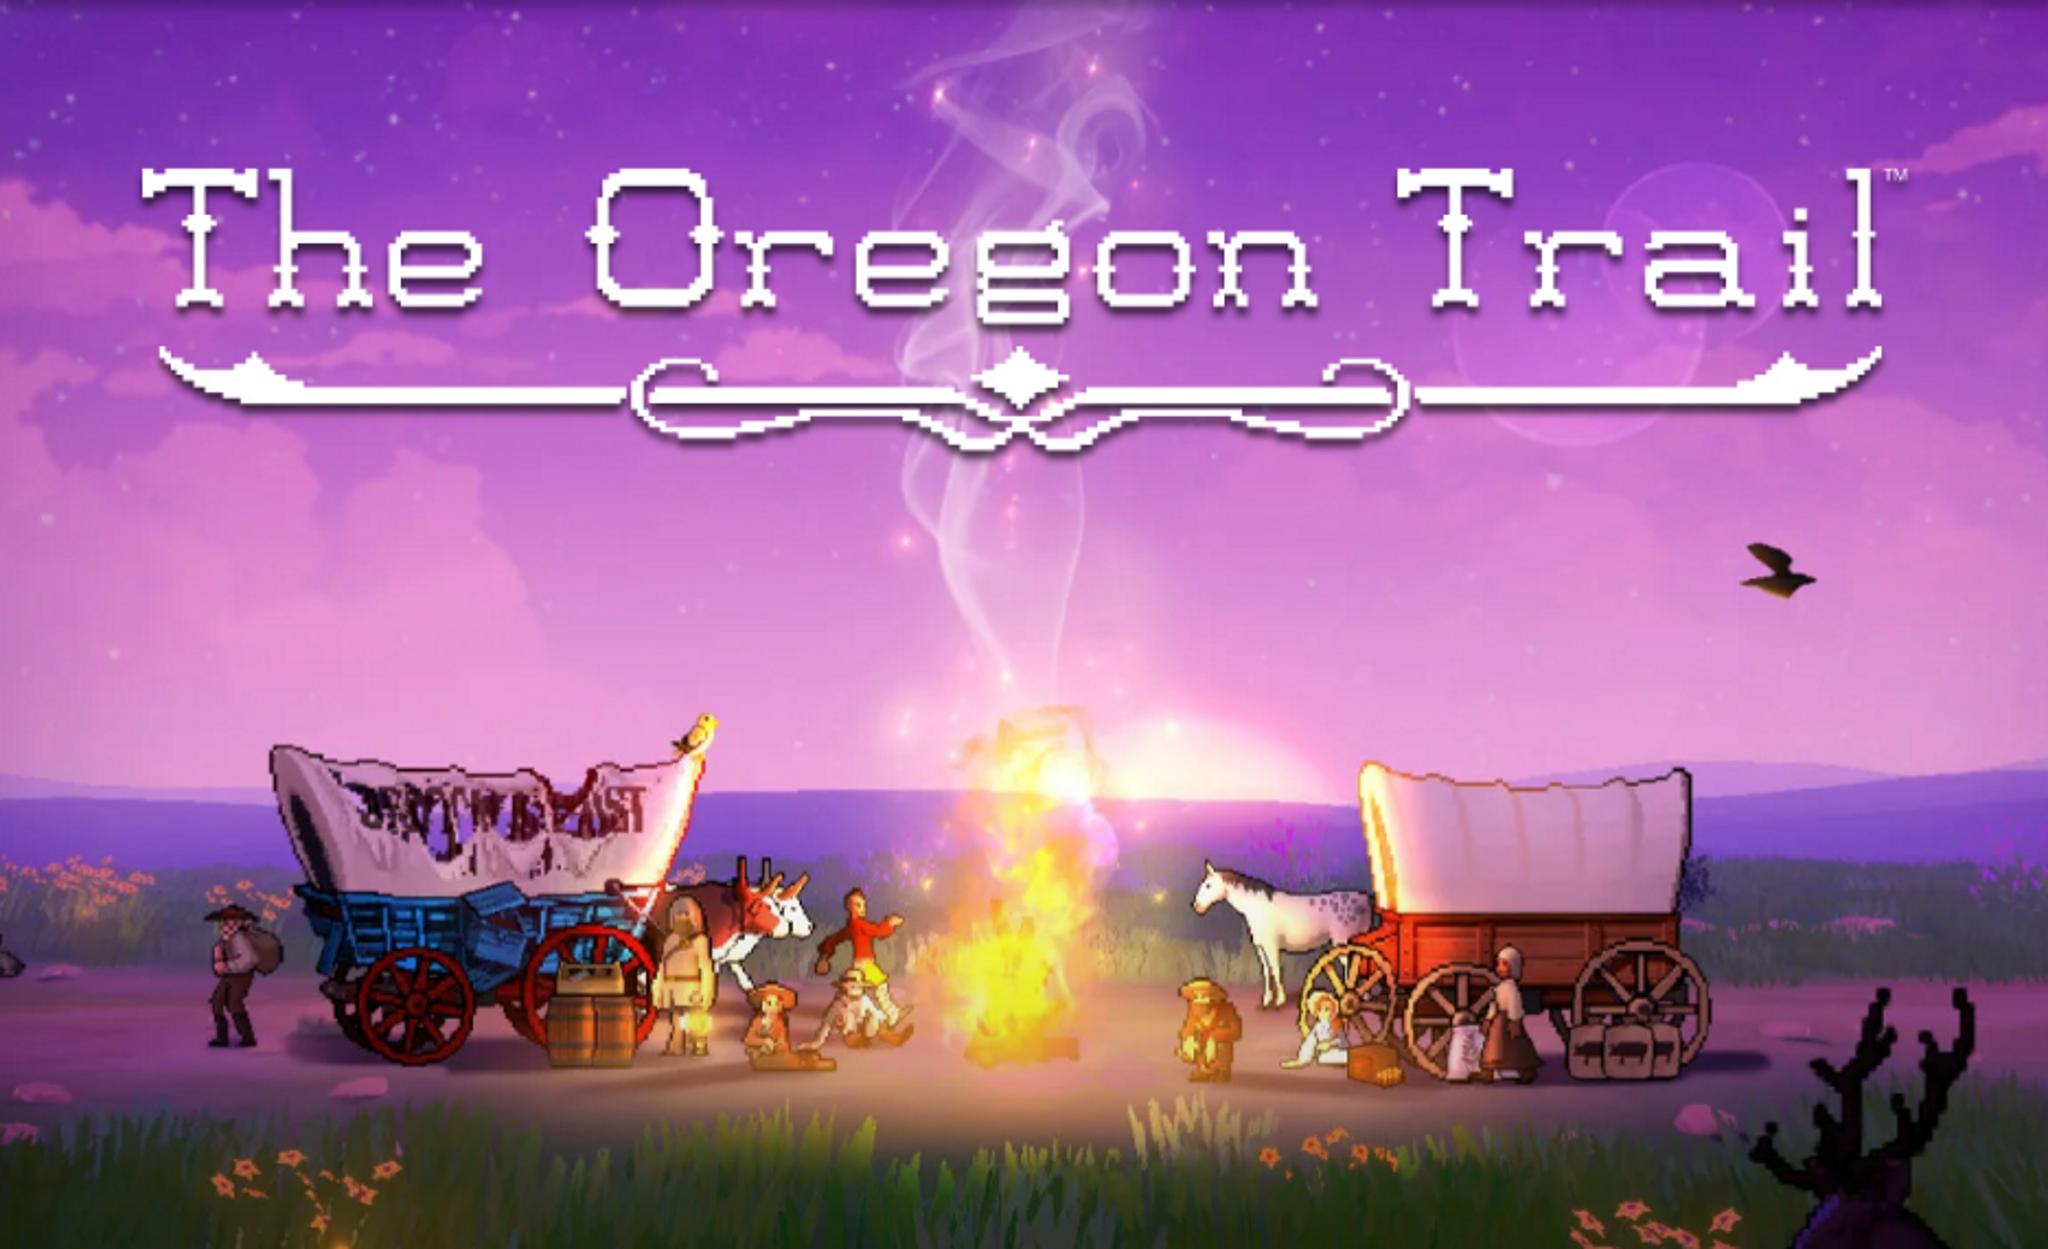 the-oregon-trail-s-new-apple-watch-app-tracks-steps-for-in-game